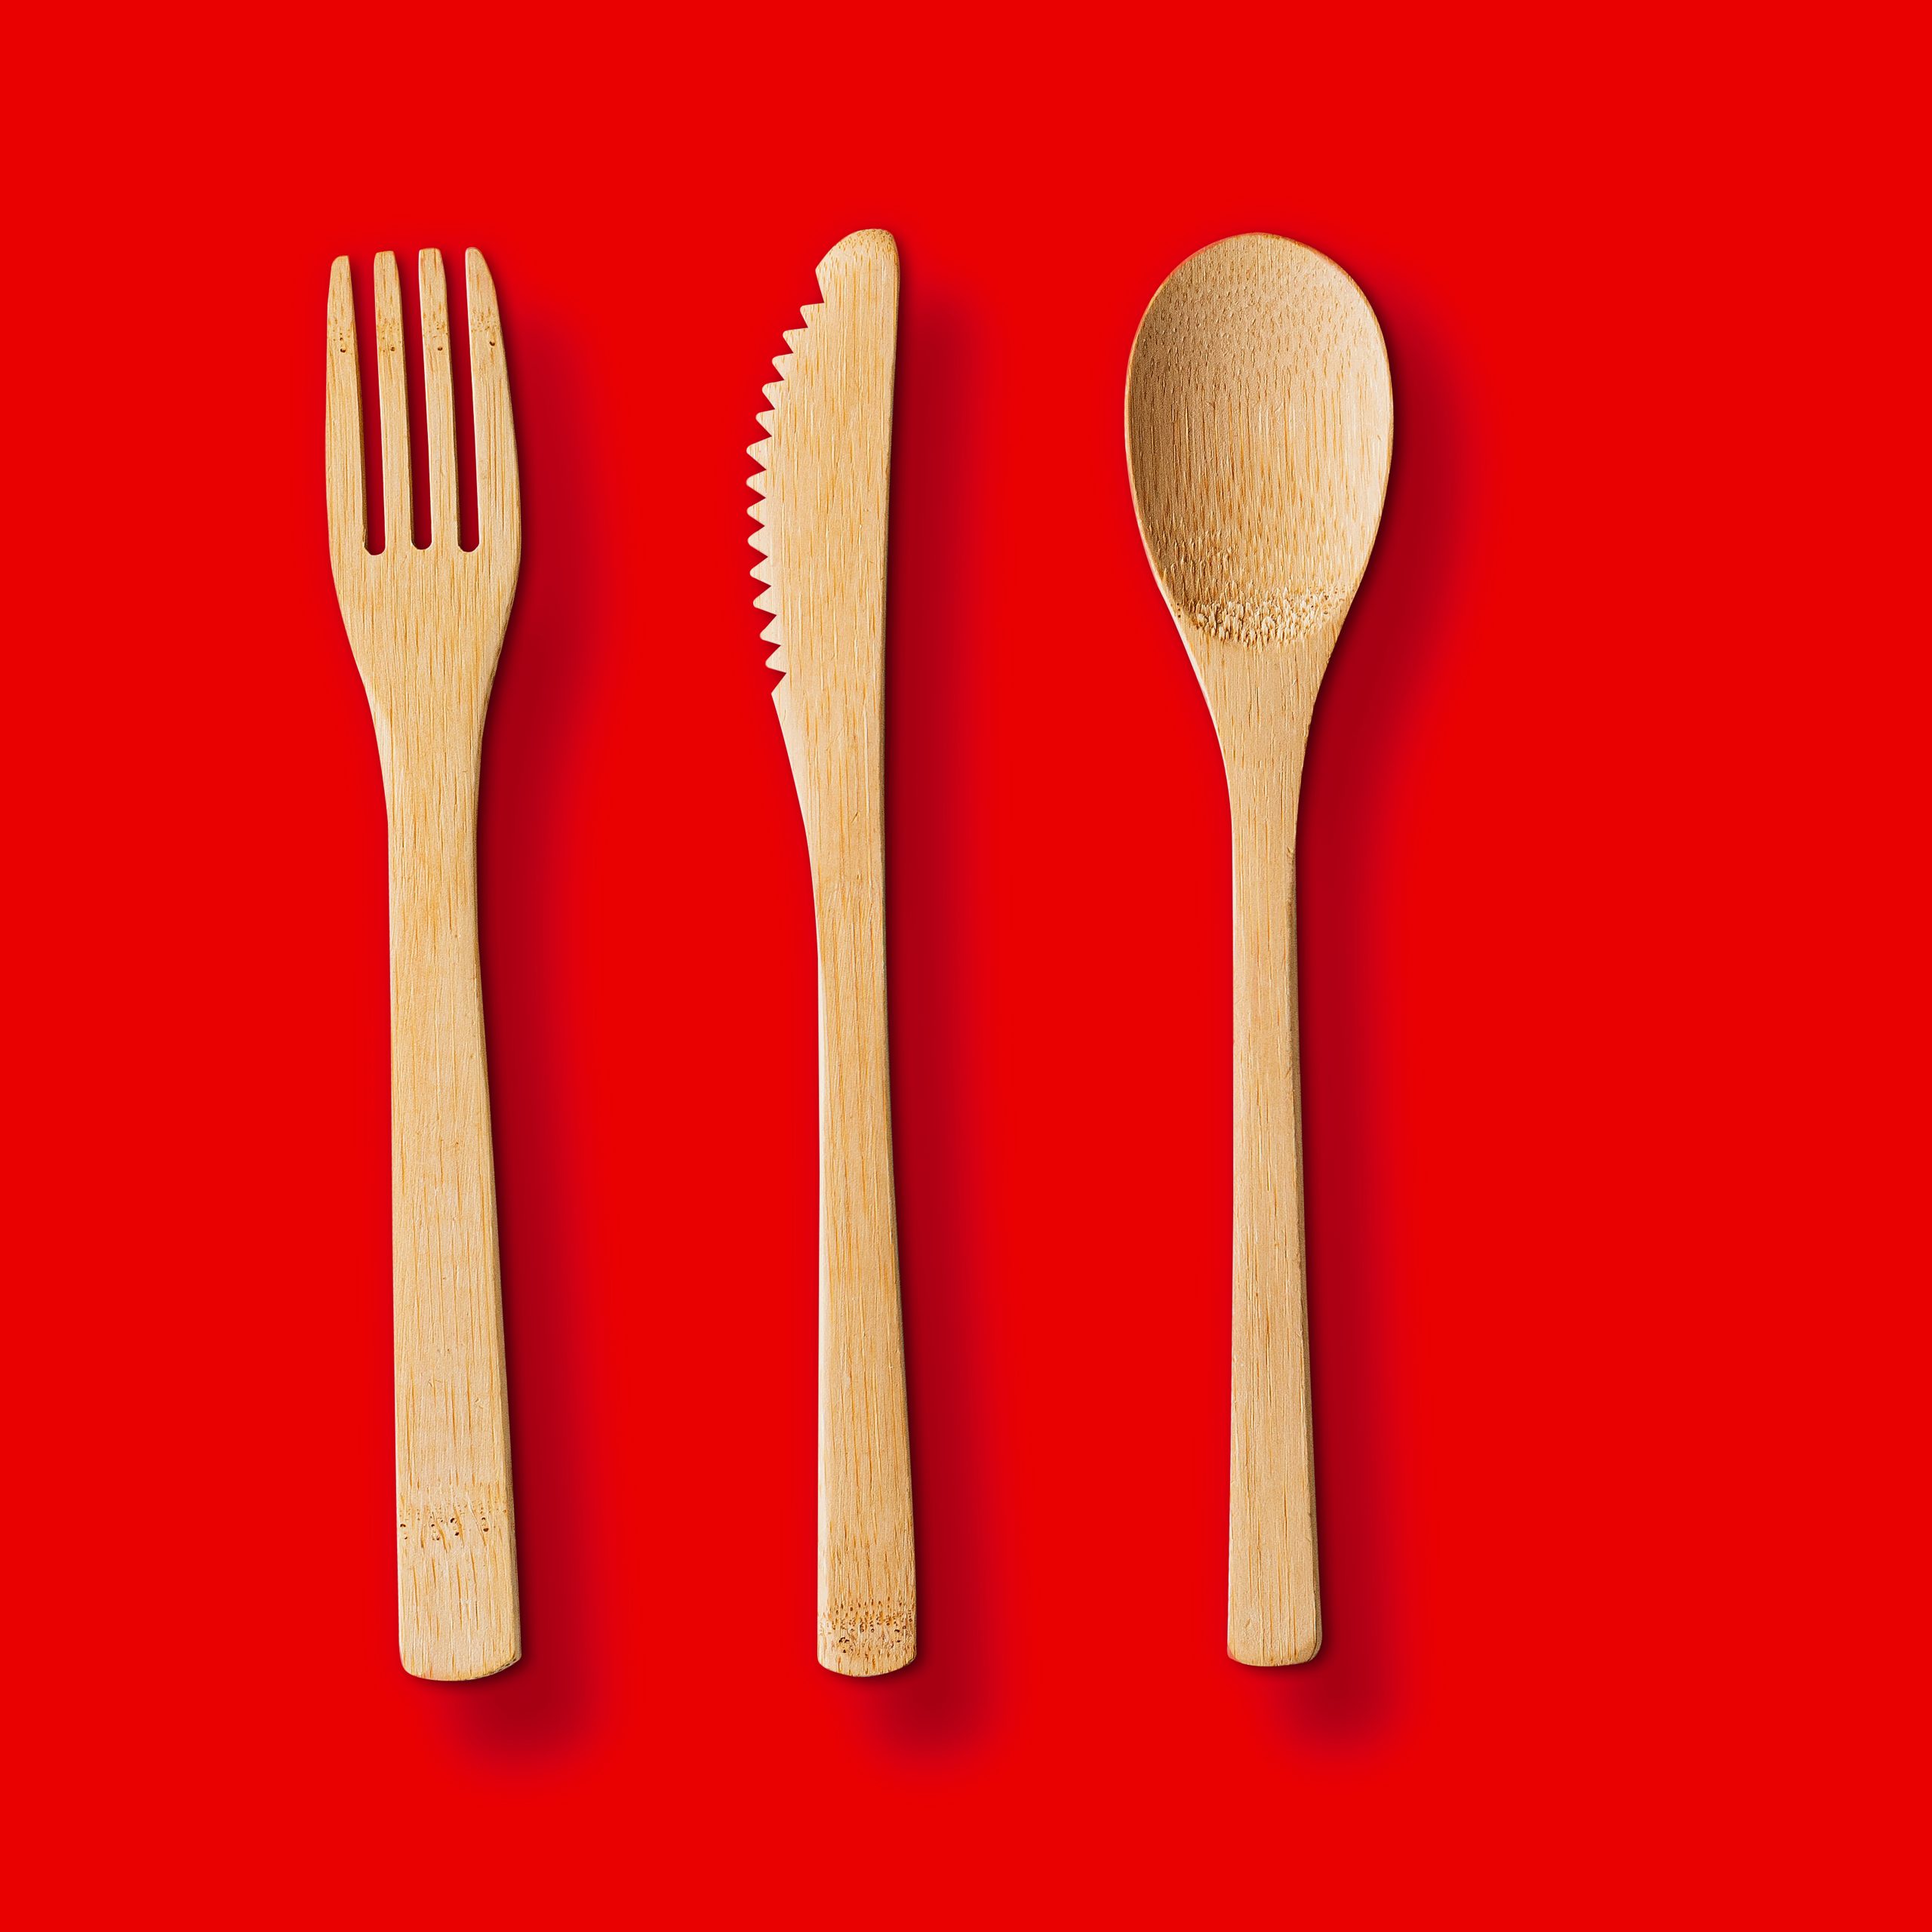 Wood utensils over red background